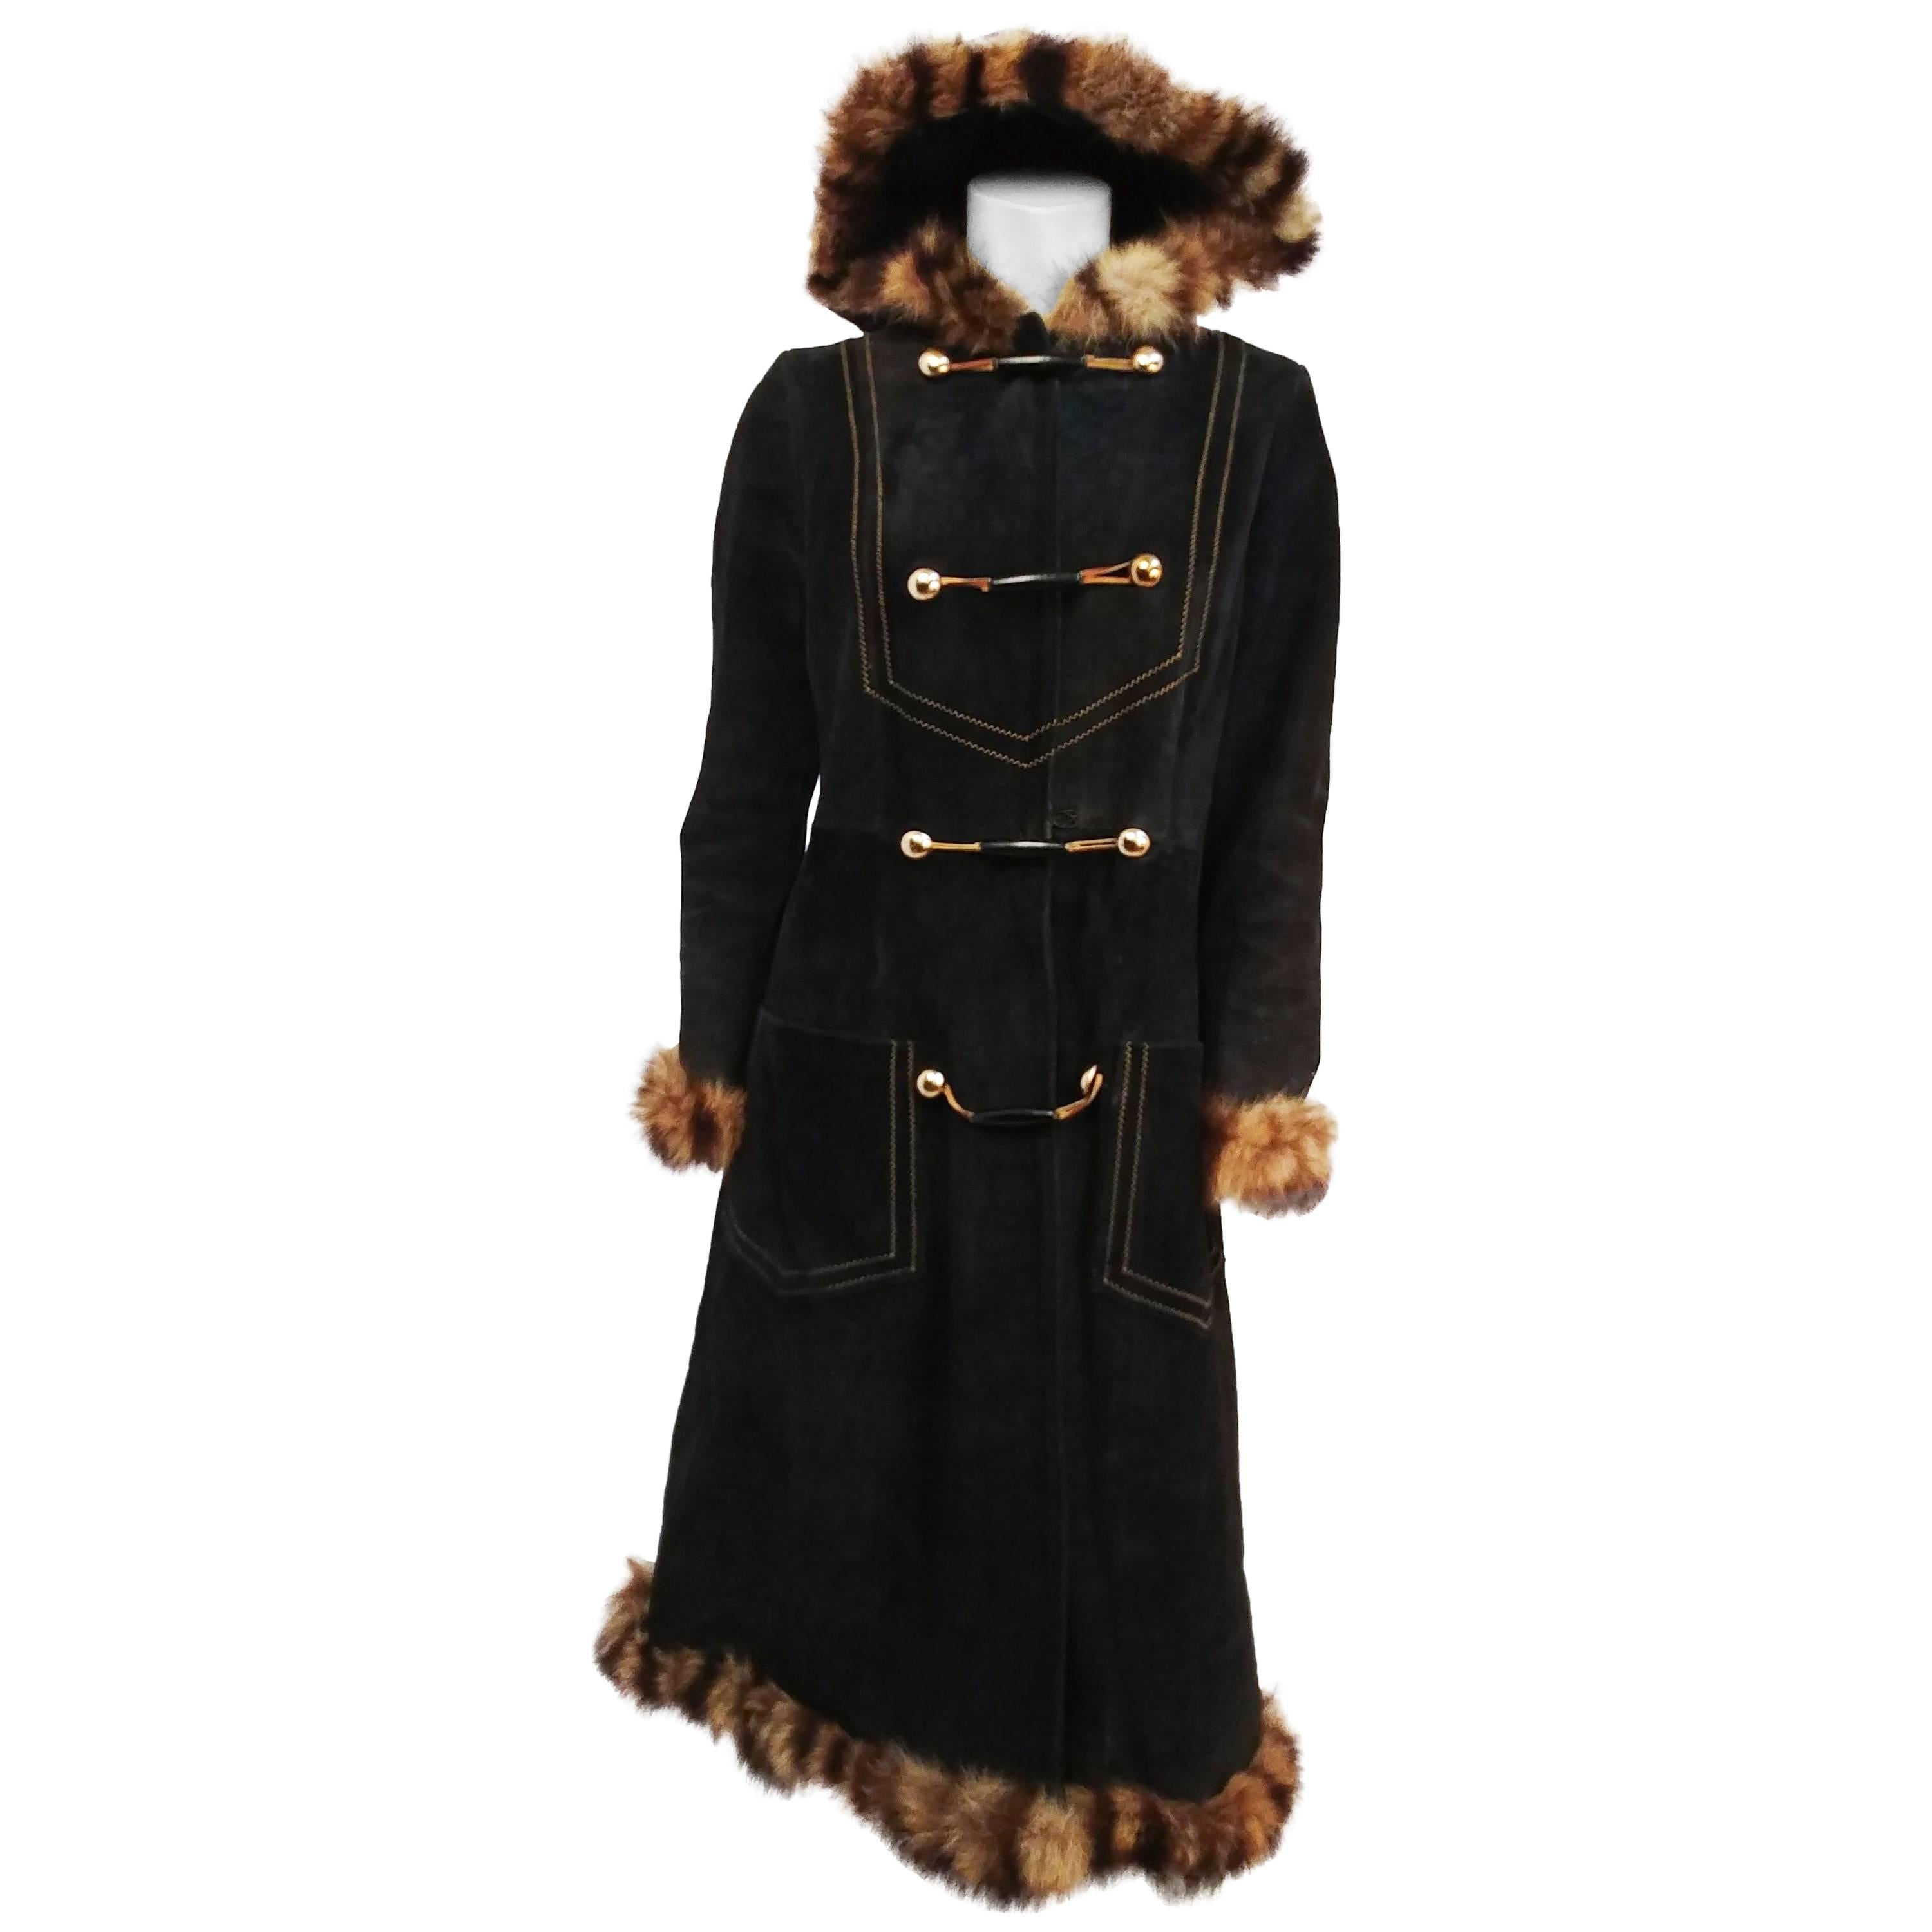 1970s Black Suede Leather Coat w/ Raccoon Trim For Sale